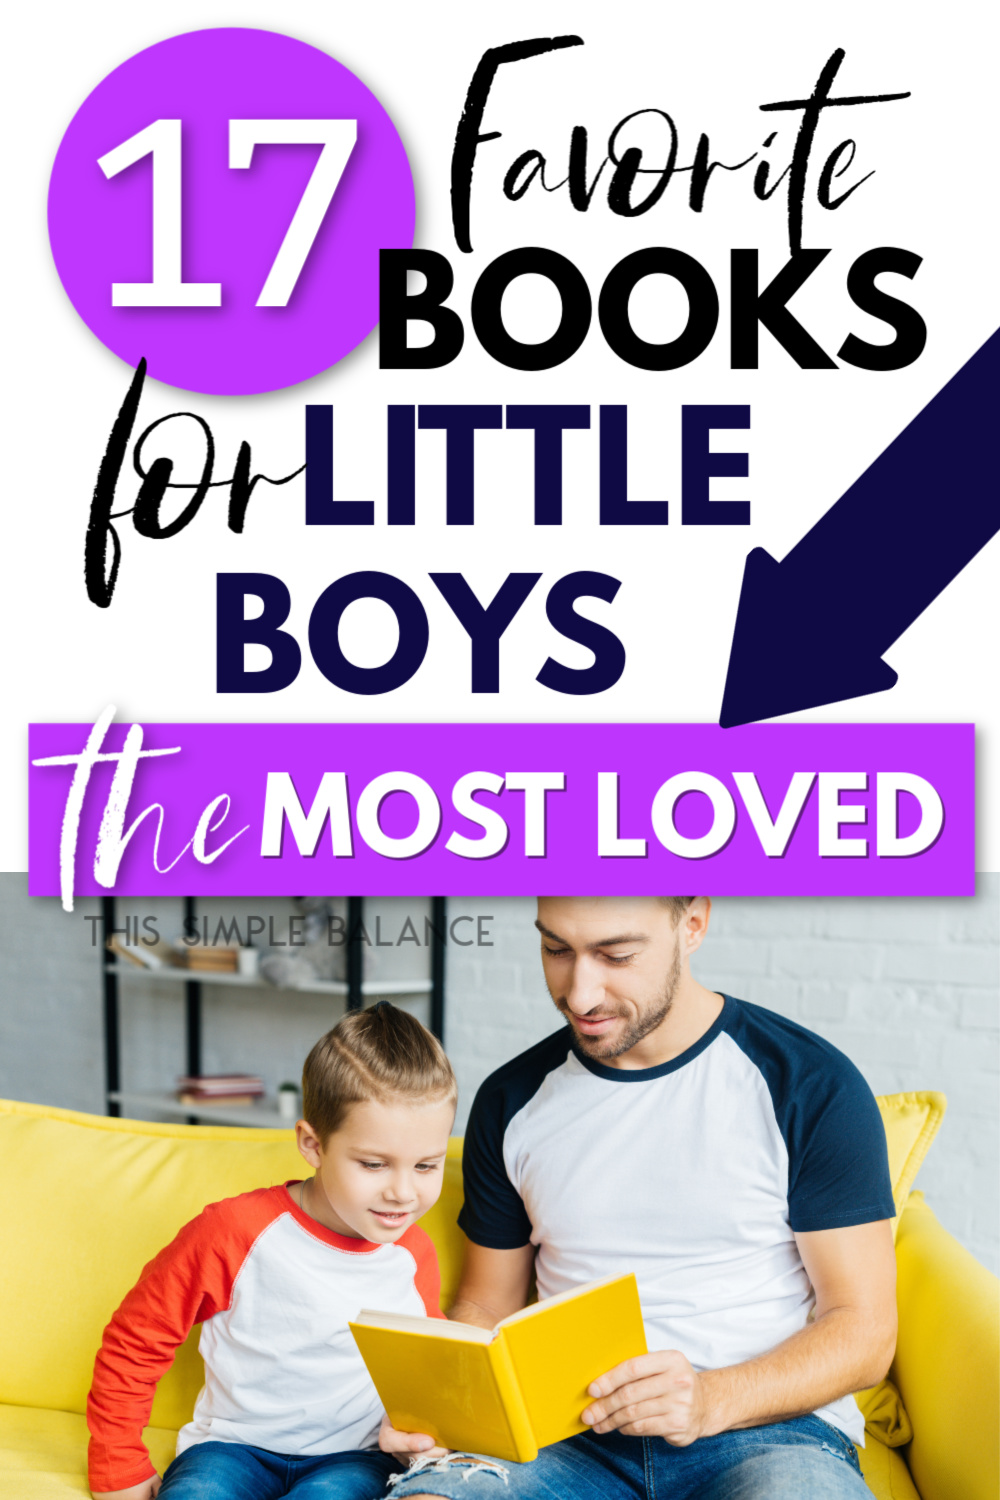 dad reading to little boy, with text overlay, "17 favorites books for little boys - the most loved"